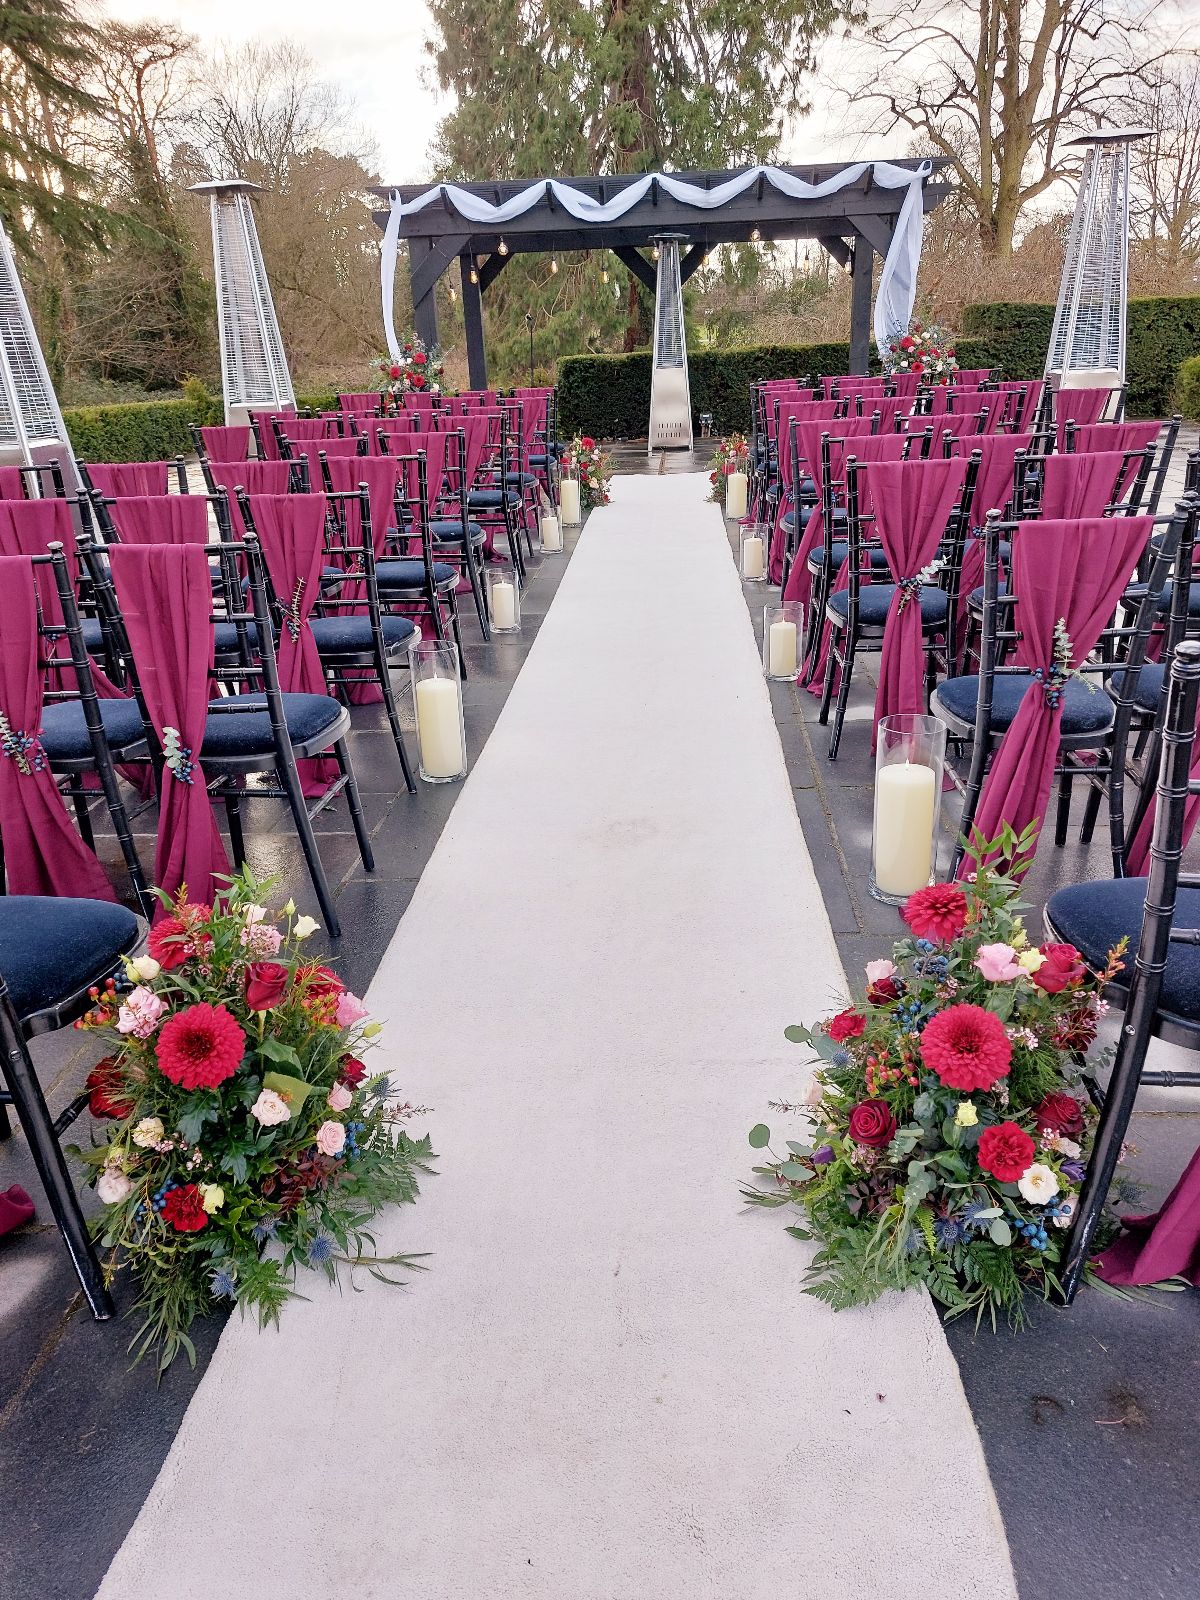 Aisle with meadow box type arrangements